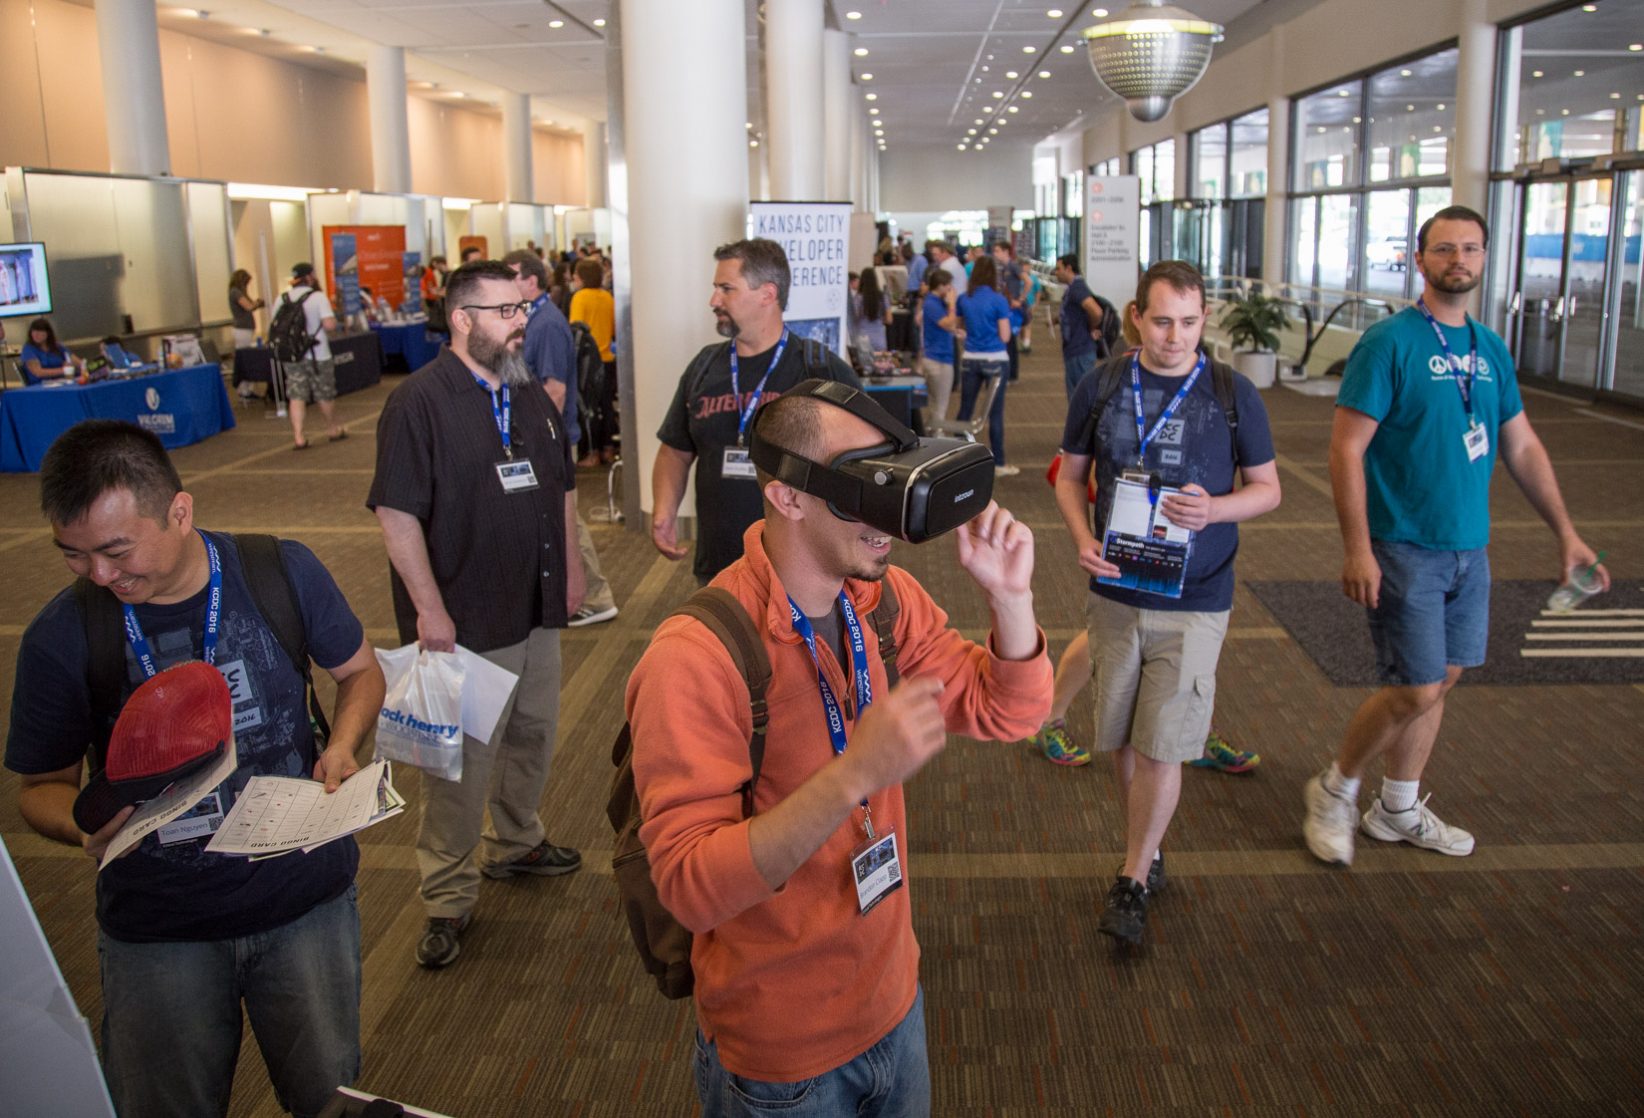 Gallery: The Kansas City Developers Conference